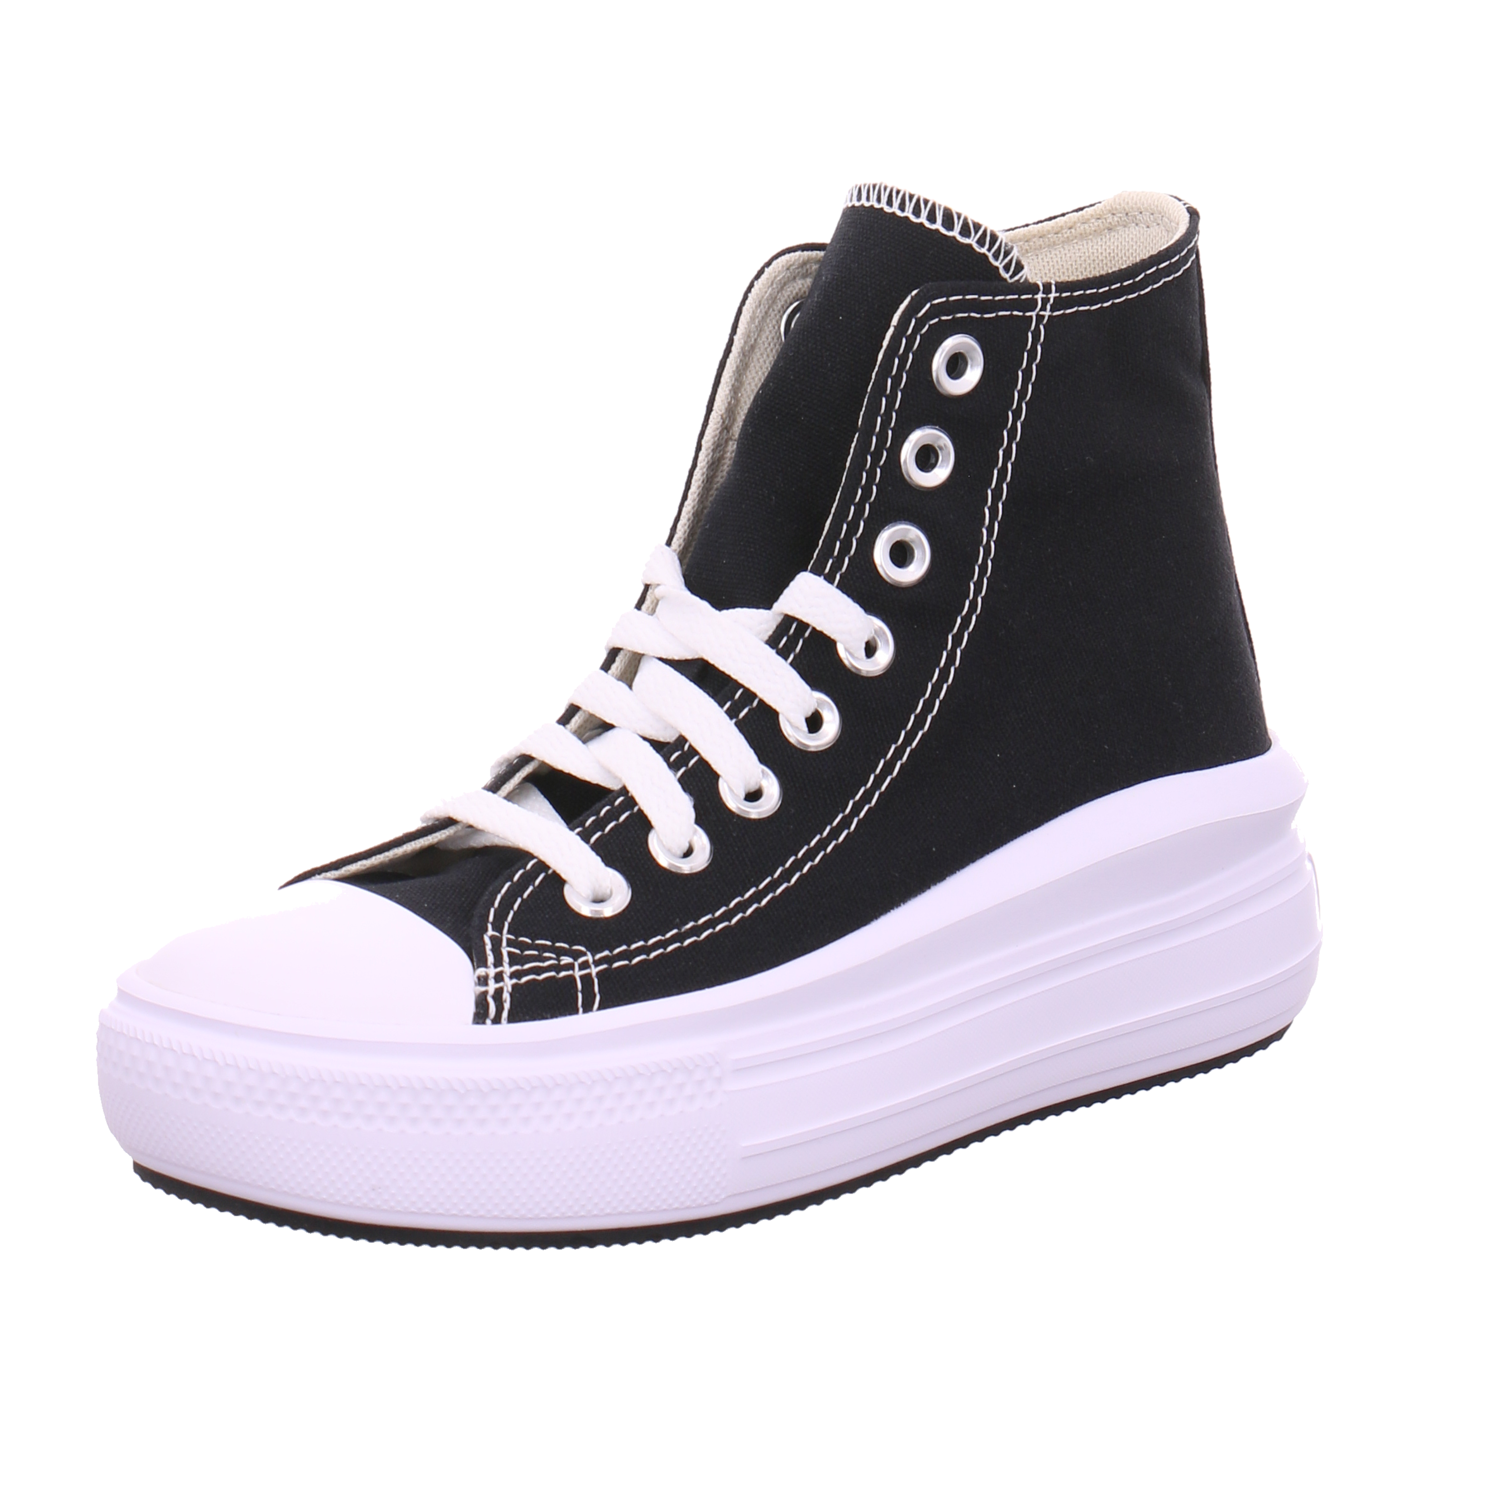 Converse AGS 568497c